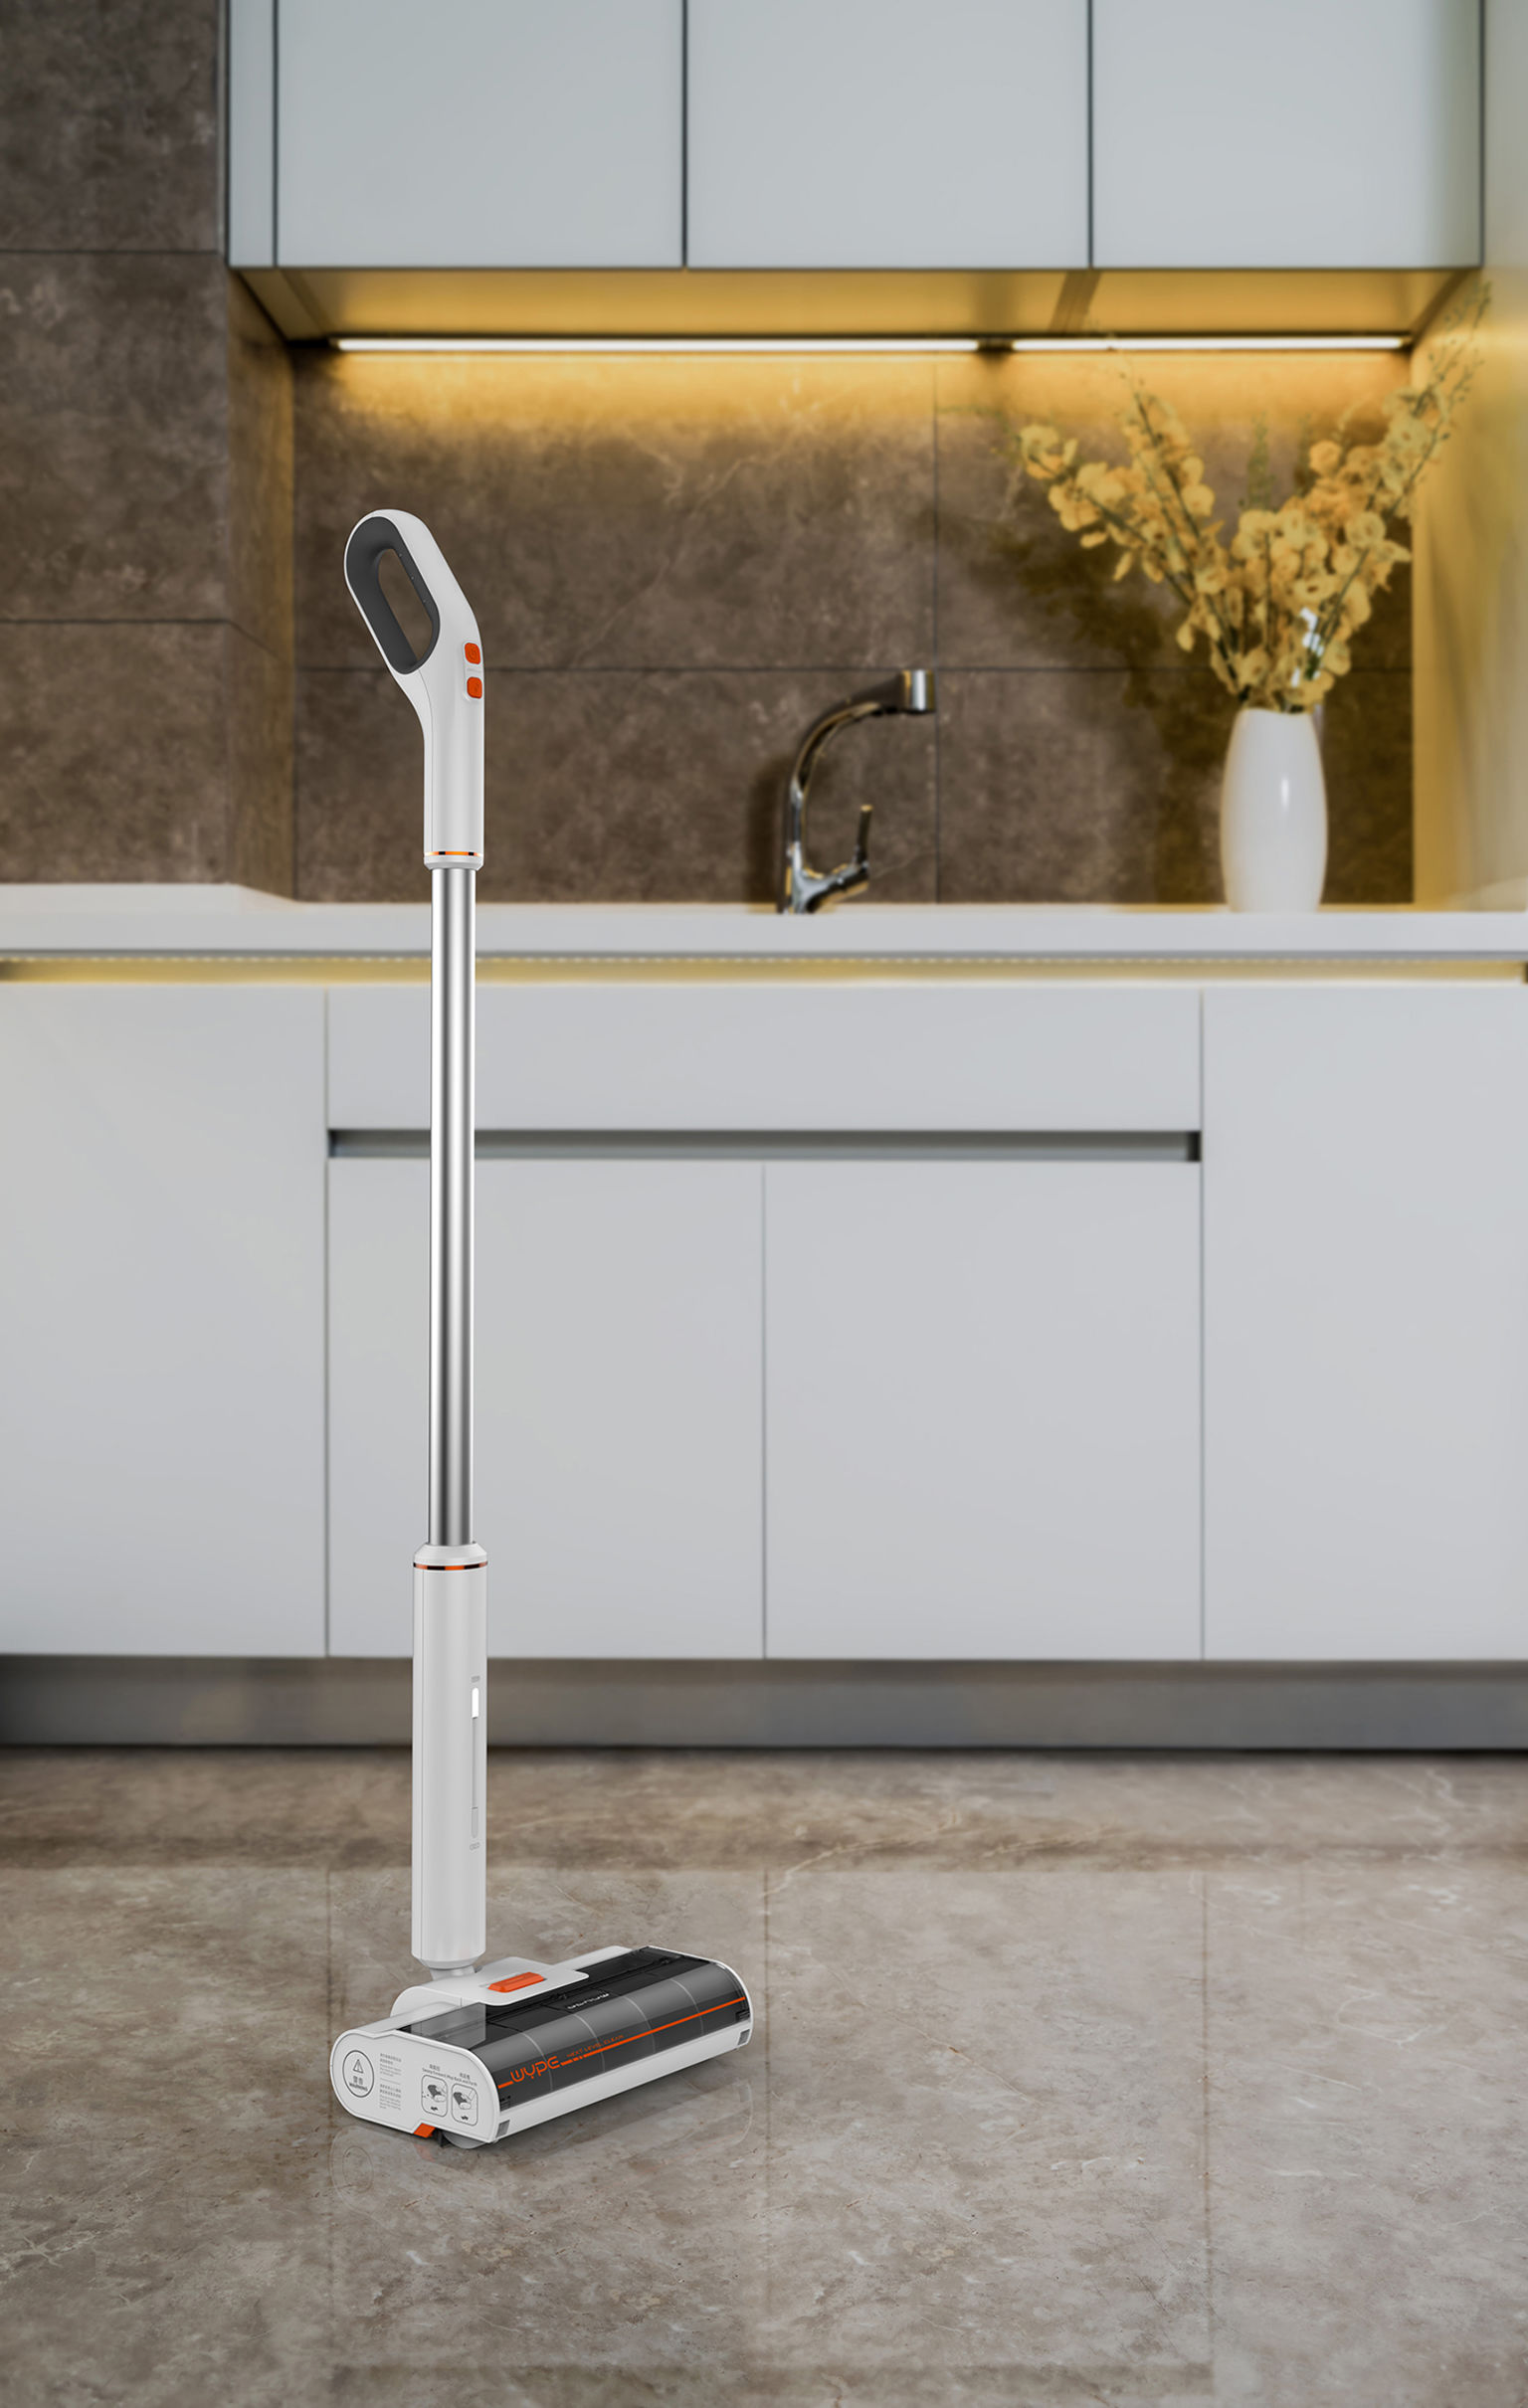 Hybrid wet&dry self-cleaning floor cleaning device